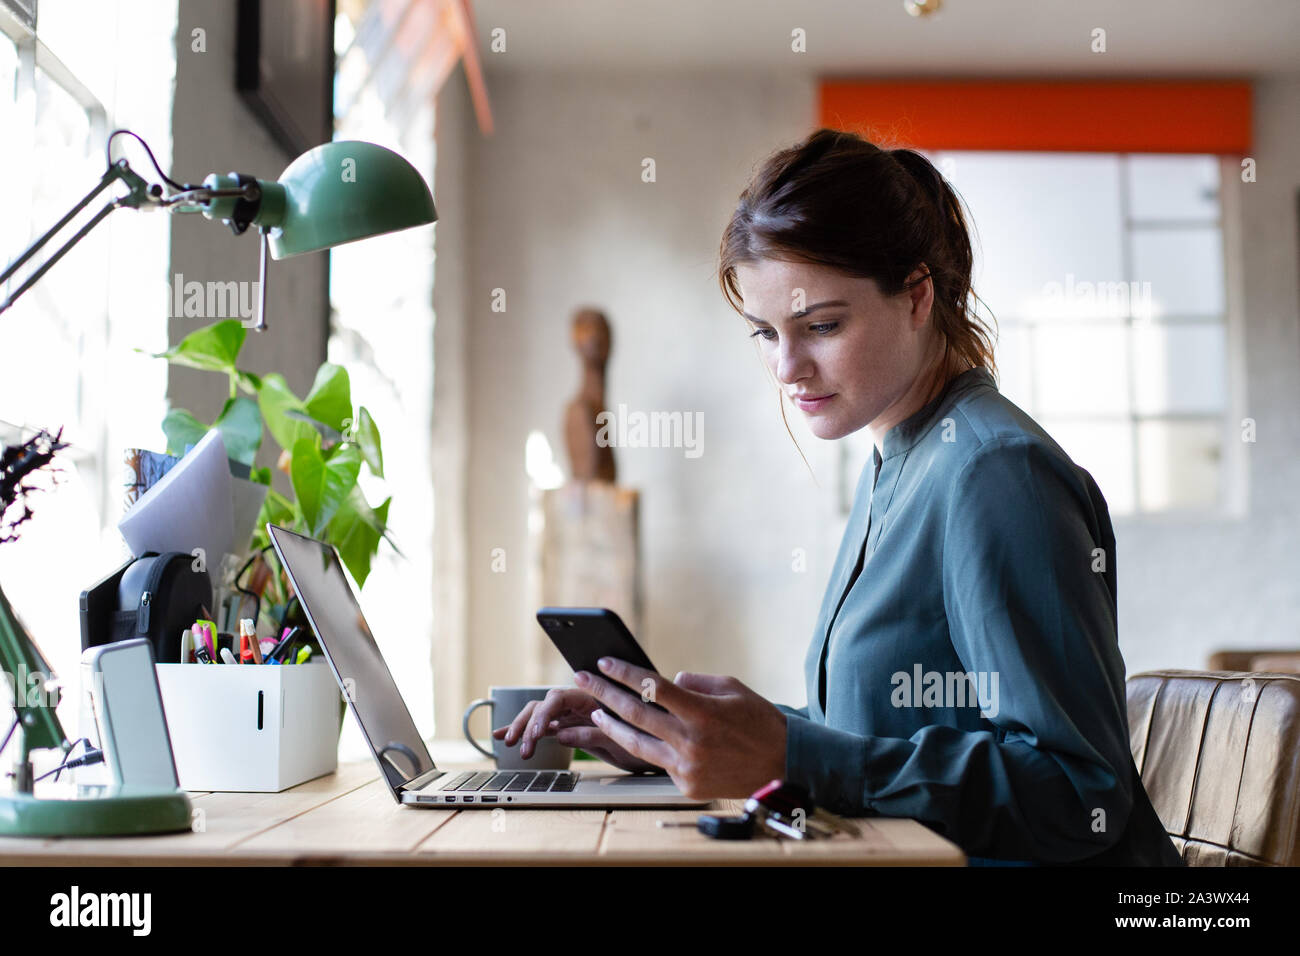 Adult female working from home Stock Photo